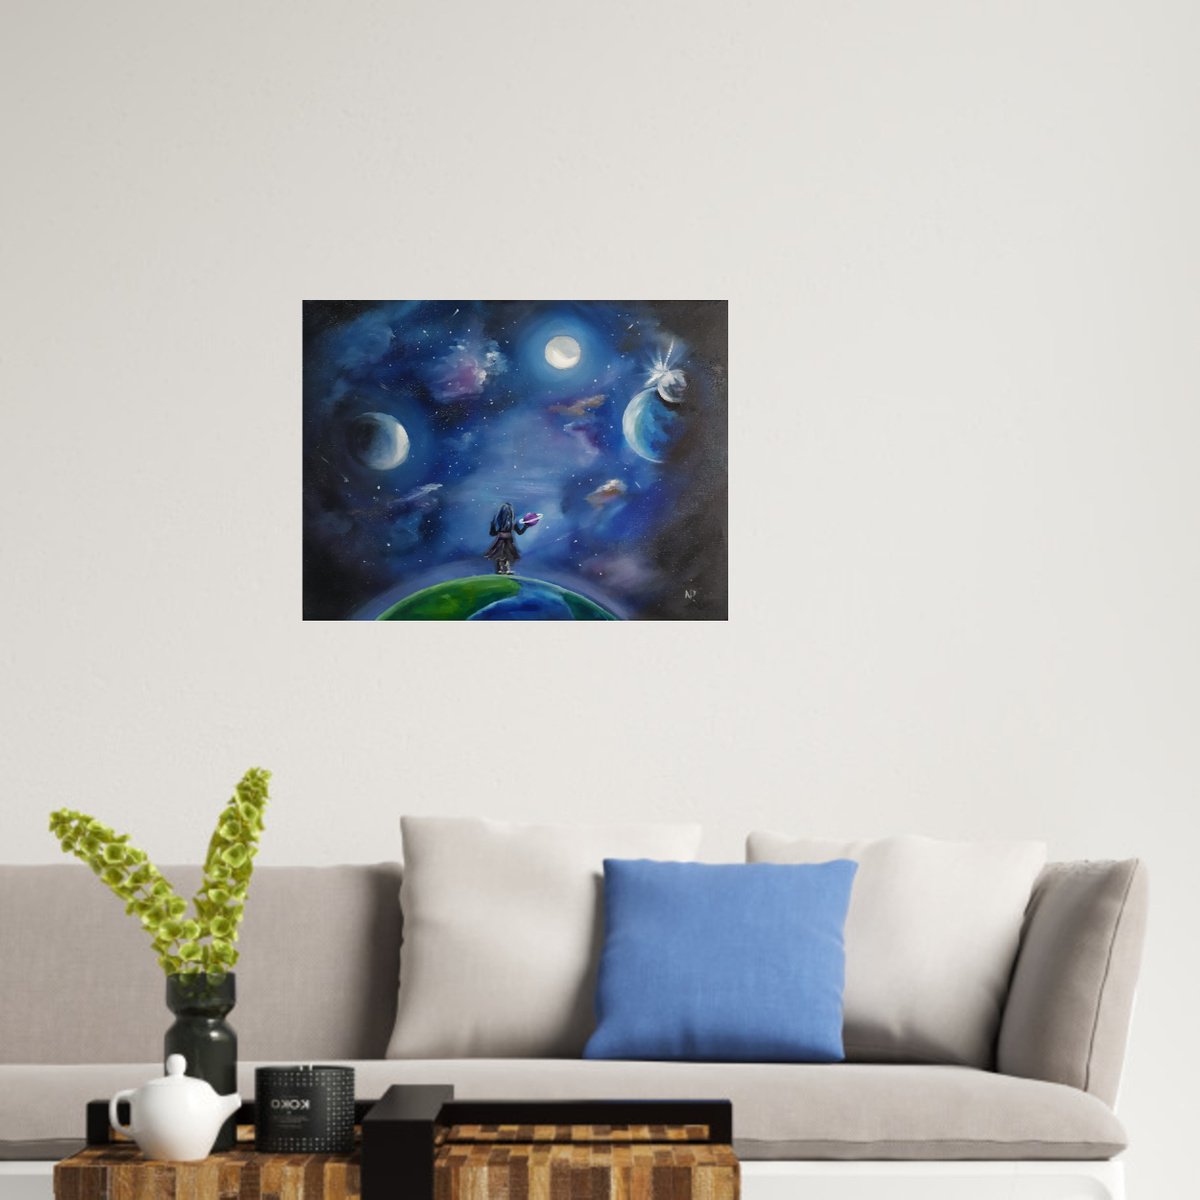 New planet, original space planets girl oil painting, gift idea, art for home by Nataliia Plakhotnyk